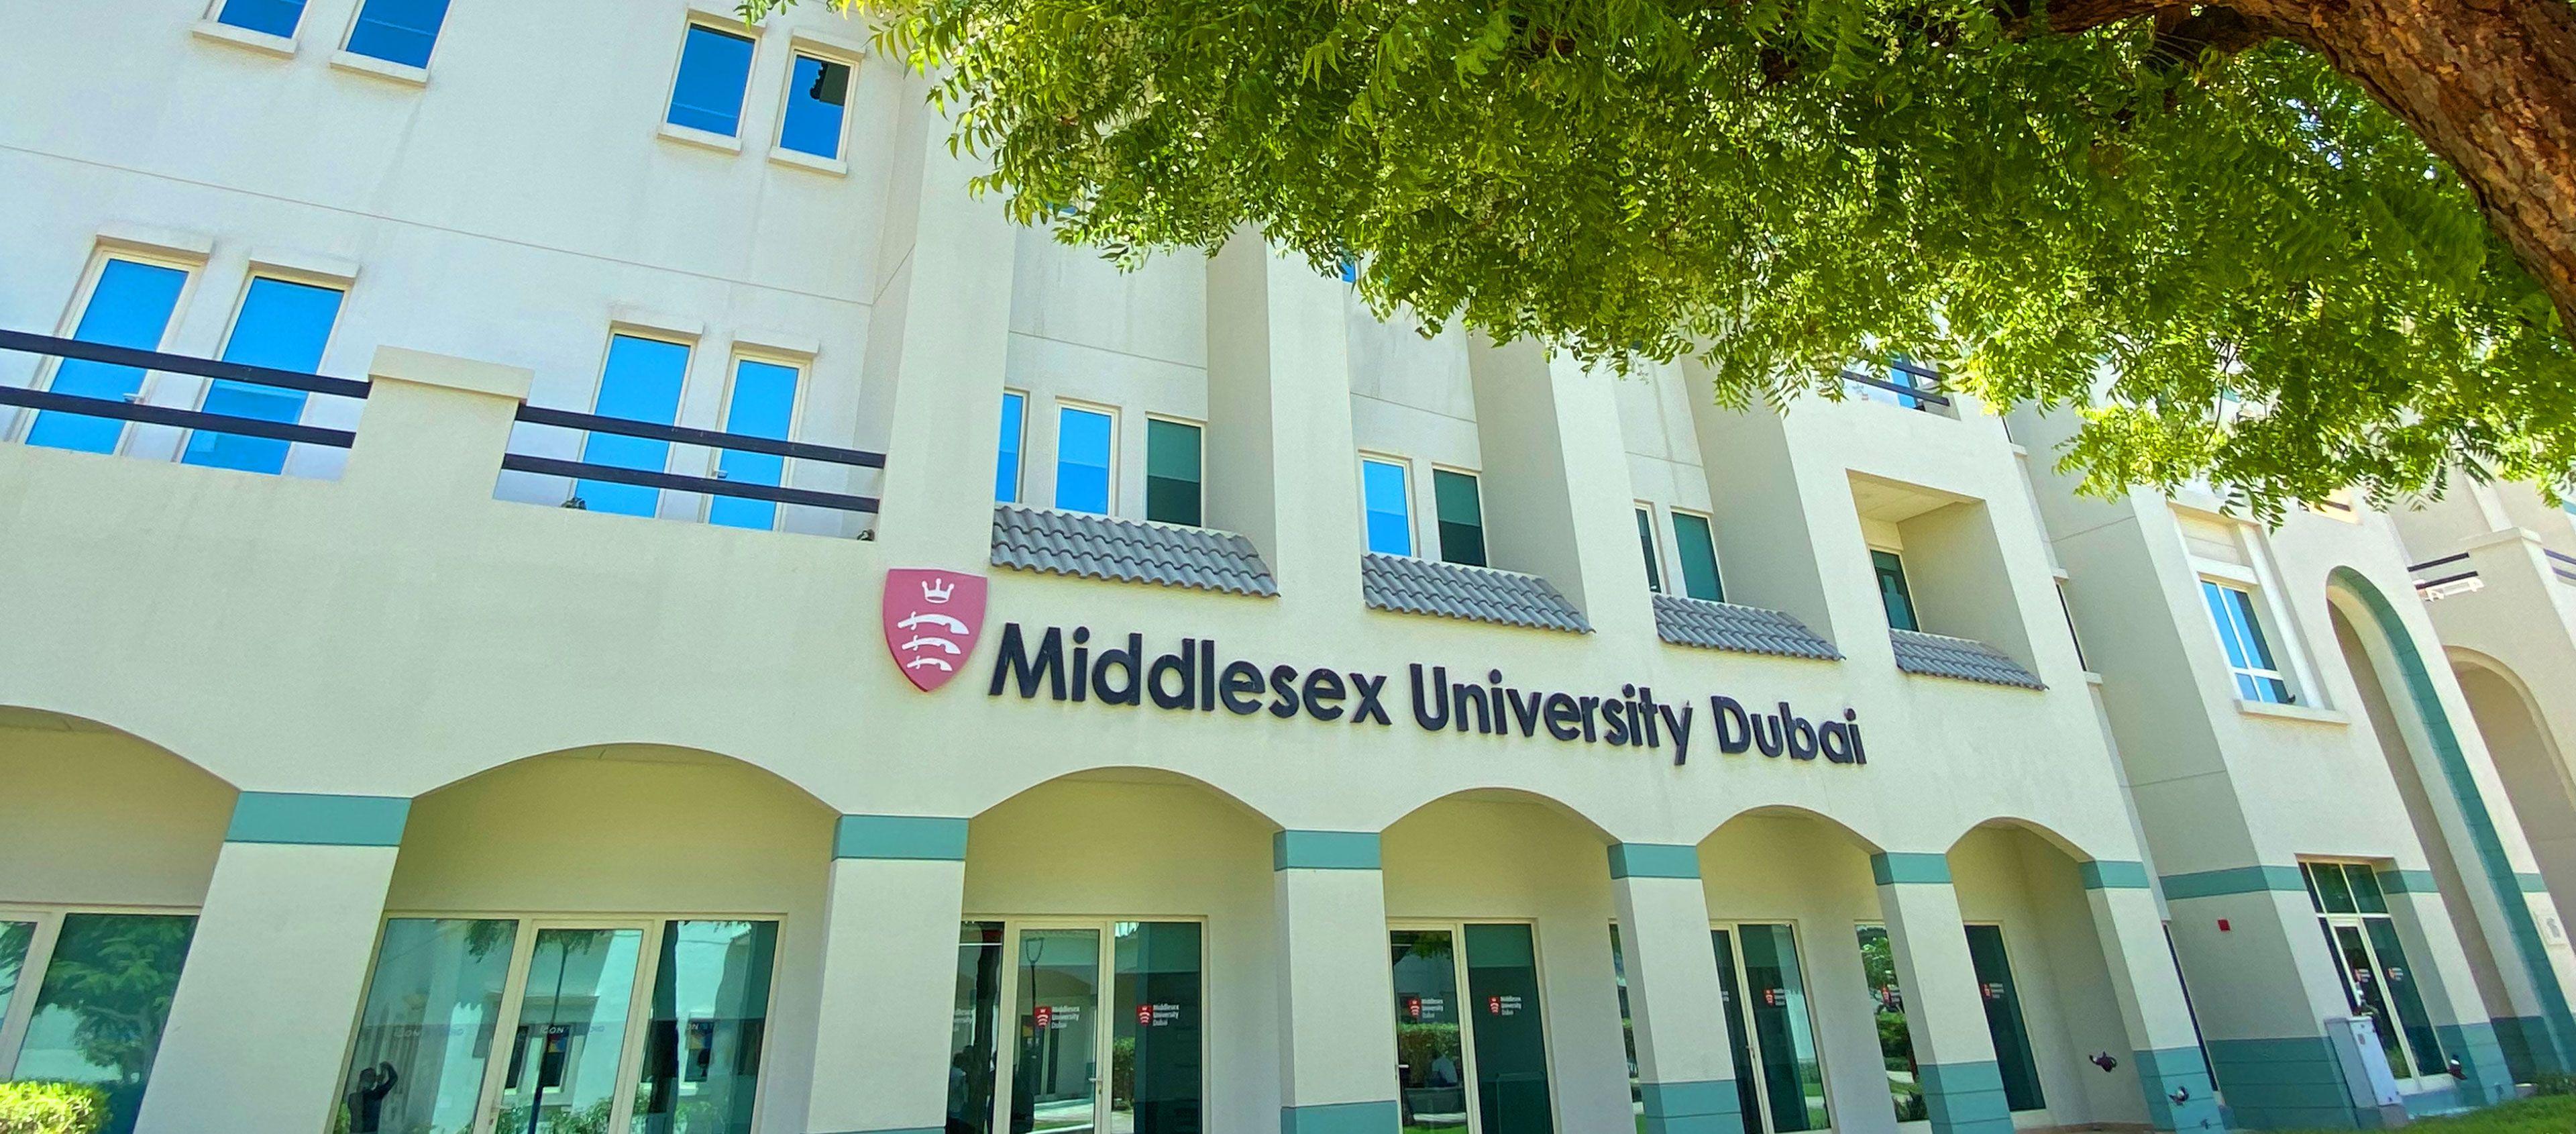 The Middlesex MBA